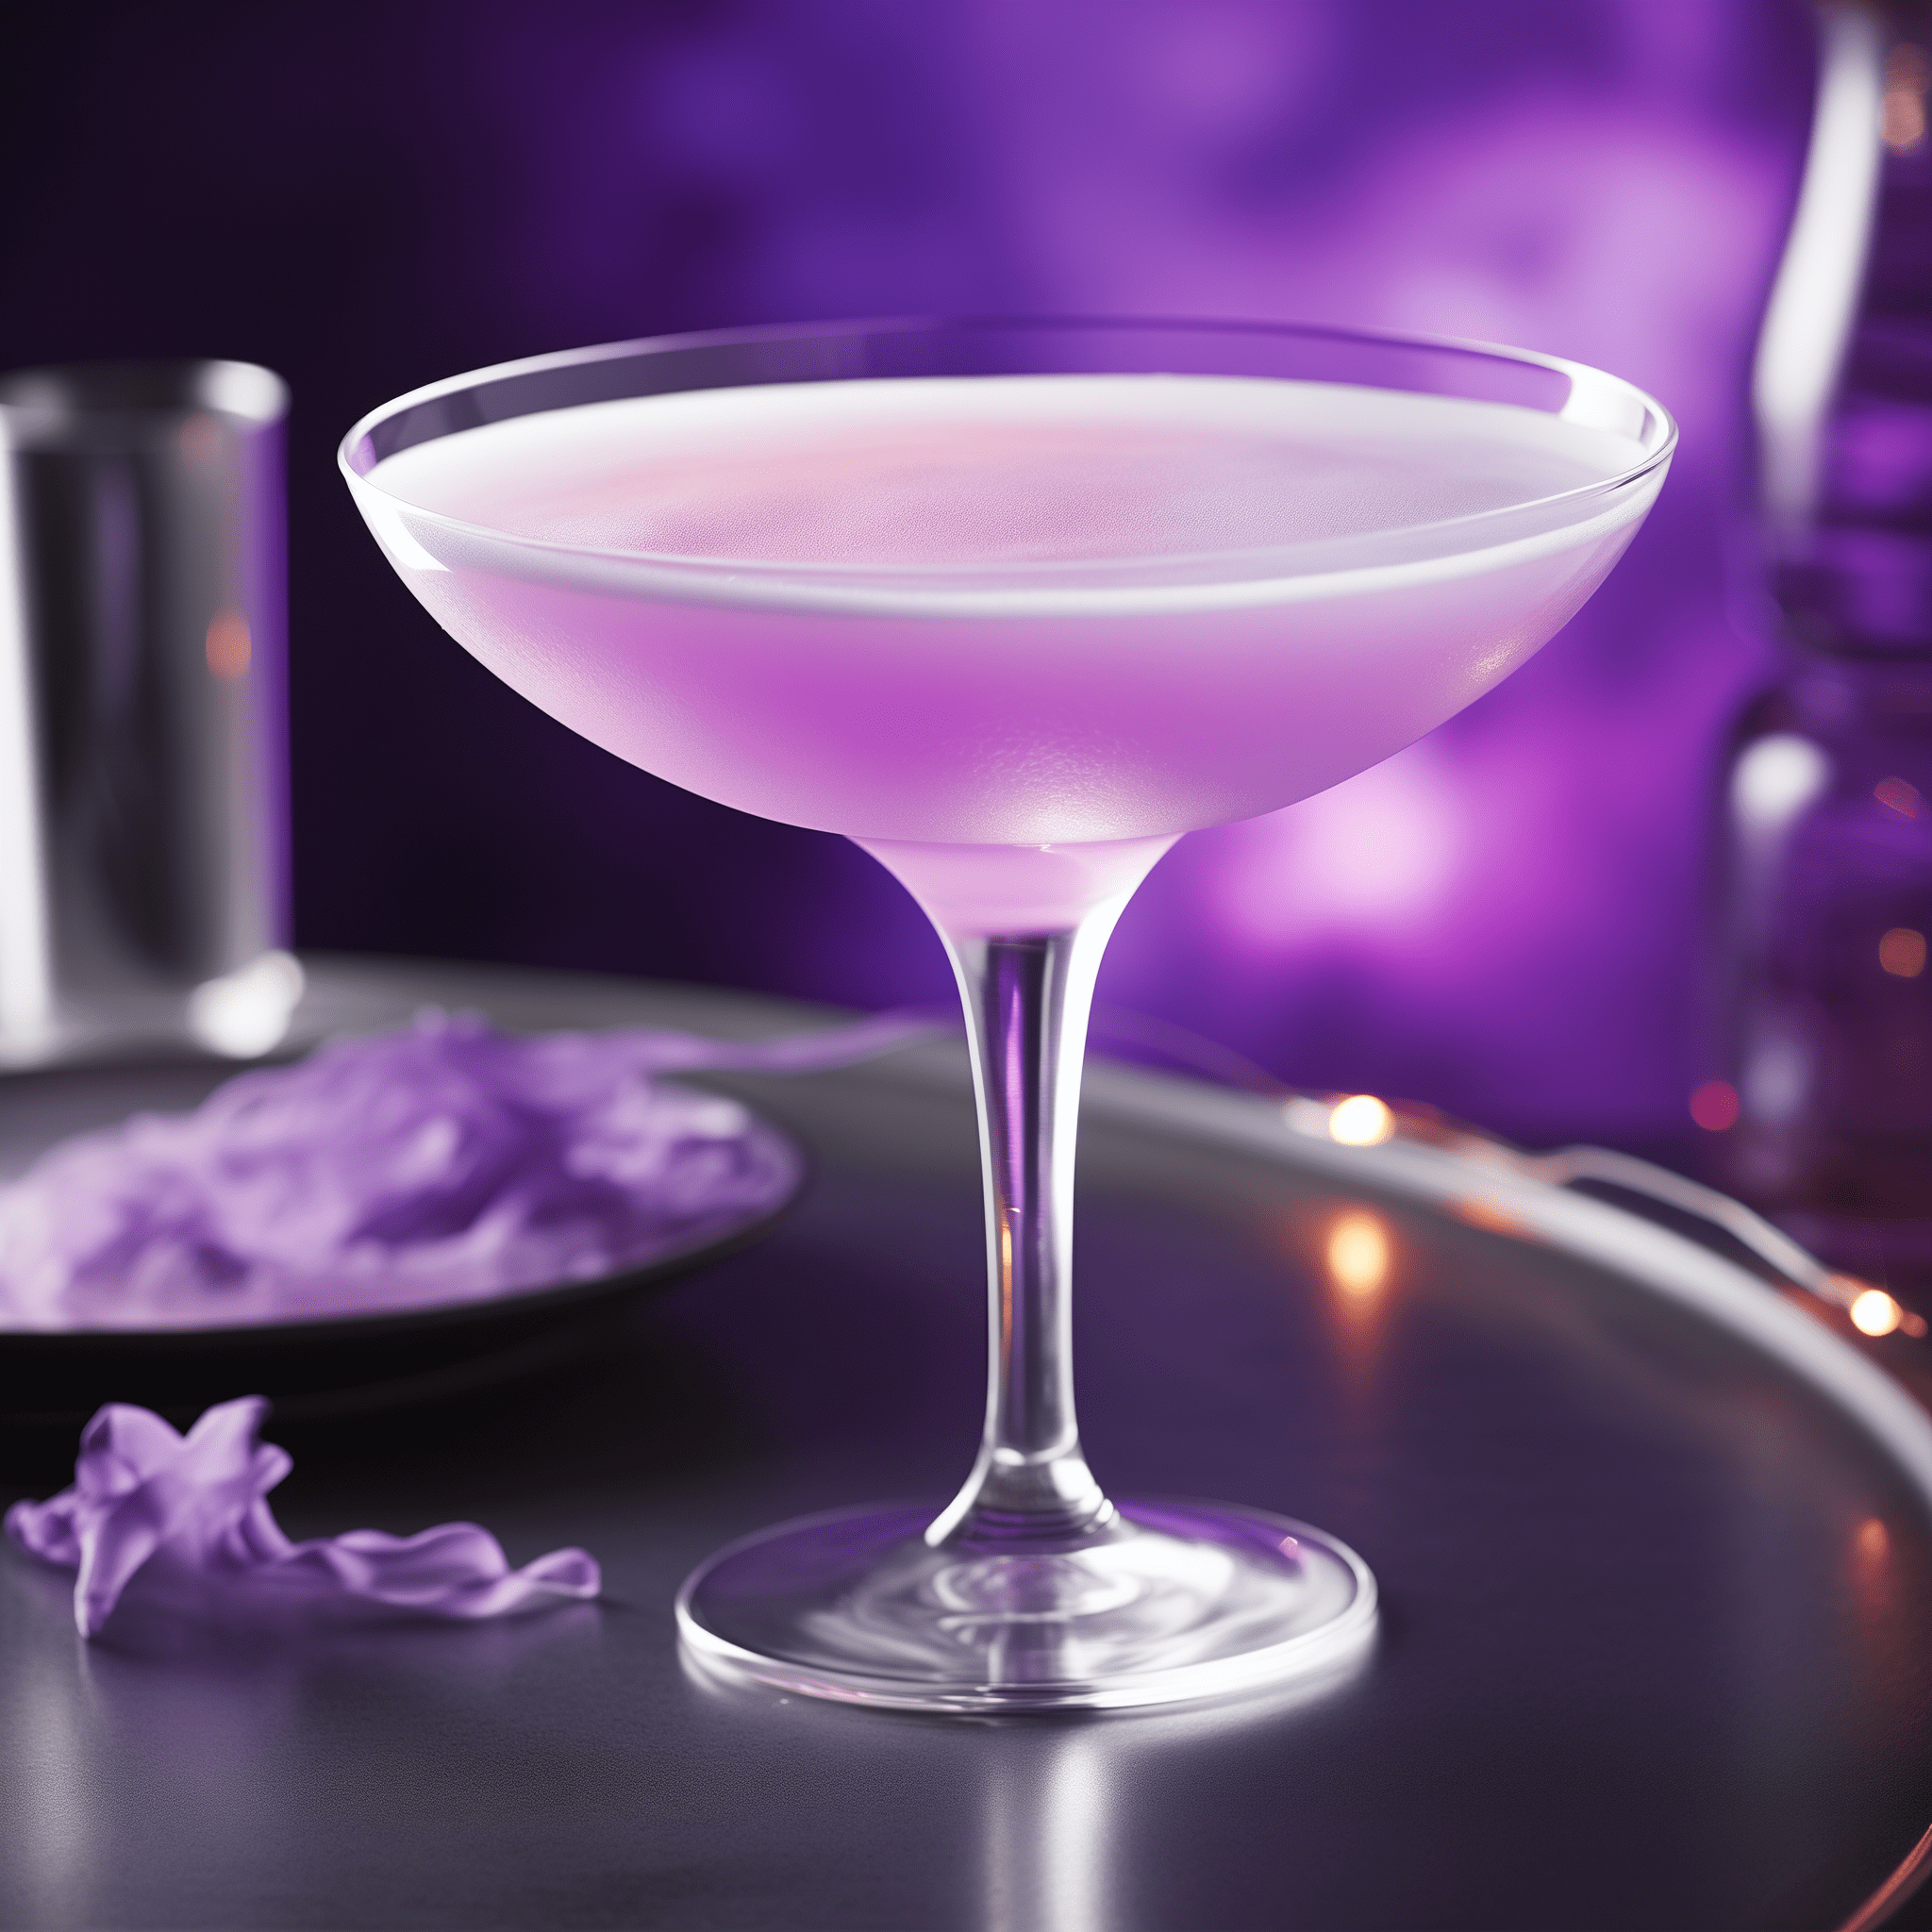 Moon Mist Cocktail Recipe - The Moon Mist cocktail offers a delightful fusion of flavors. It's a tantalizing mix that's both sweet and slightly tart, with the maraschino liqueur providing a subtle almond-like undertone. The white grape juice adds a fruity freshness that complements the botanicals in the gin, creating a light and refreshing drink with a complex flavor profile.